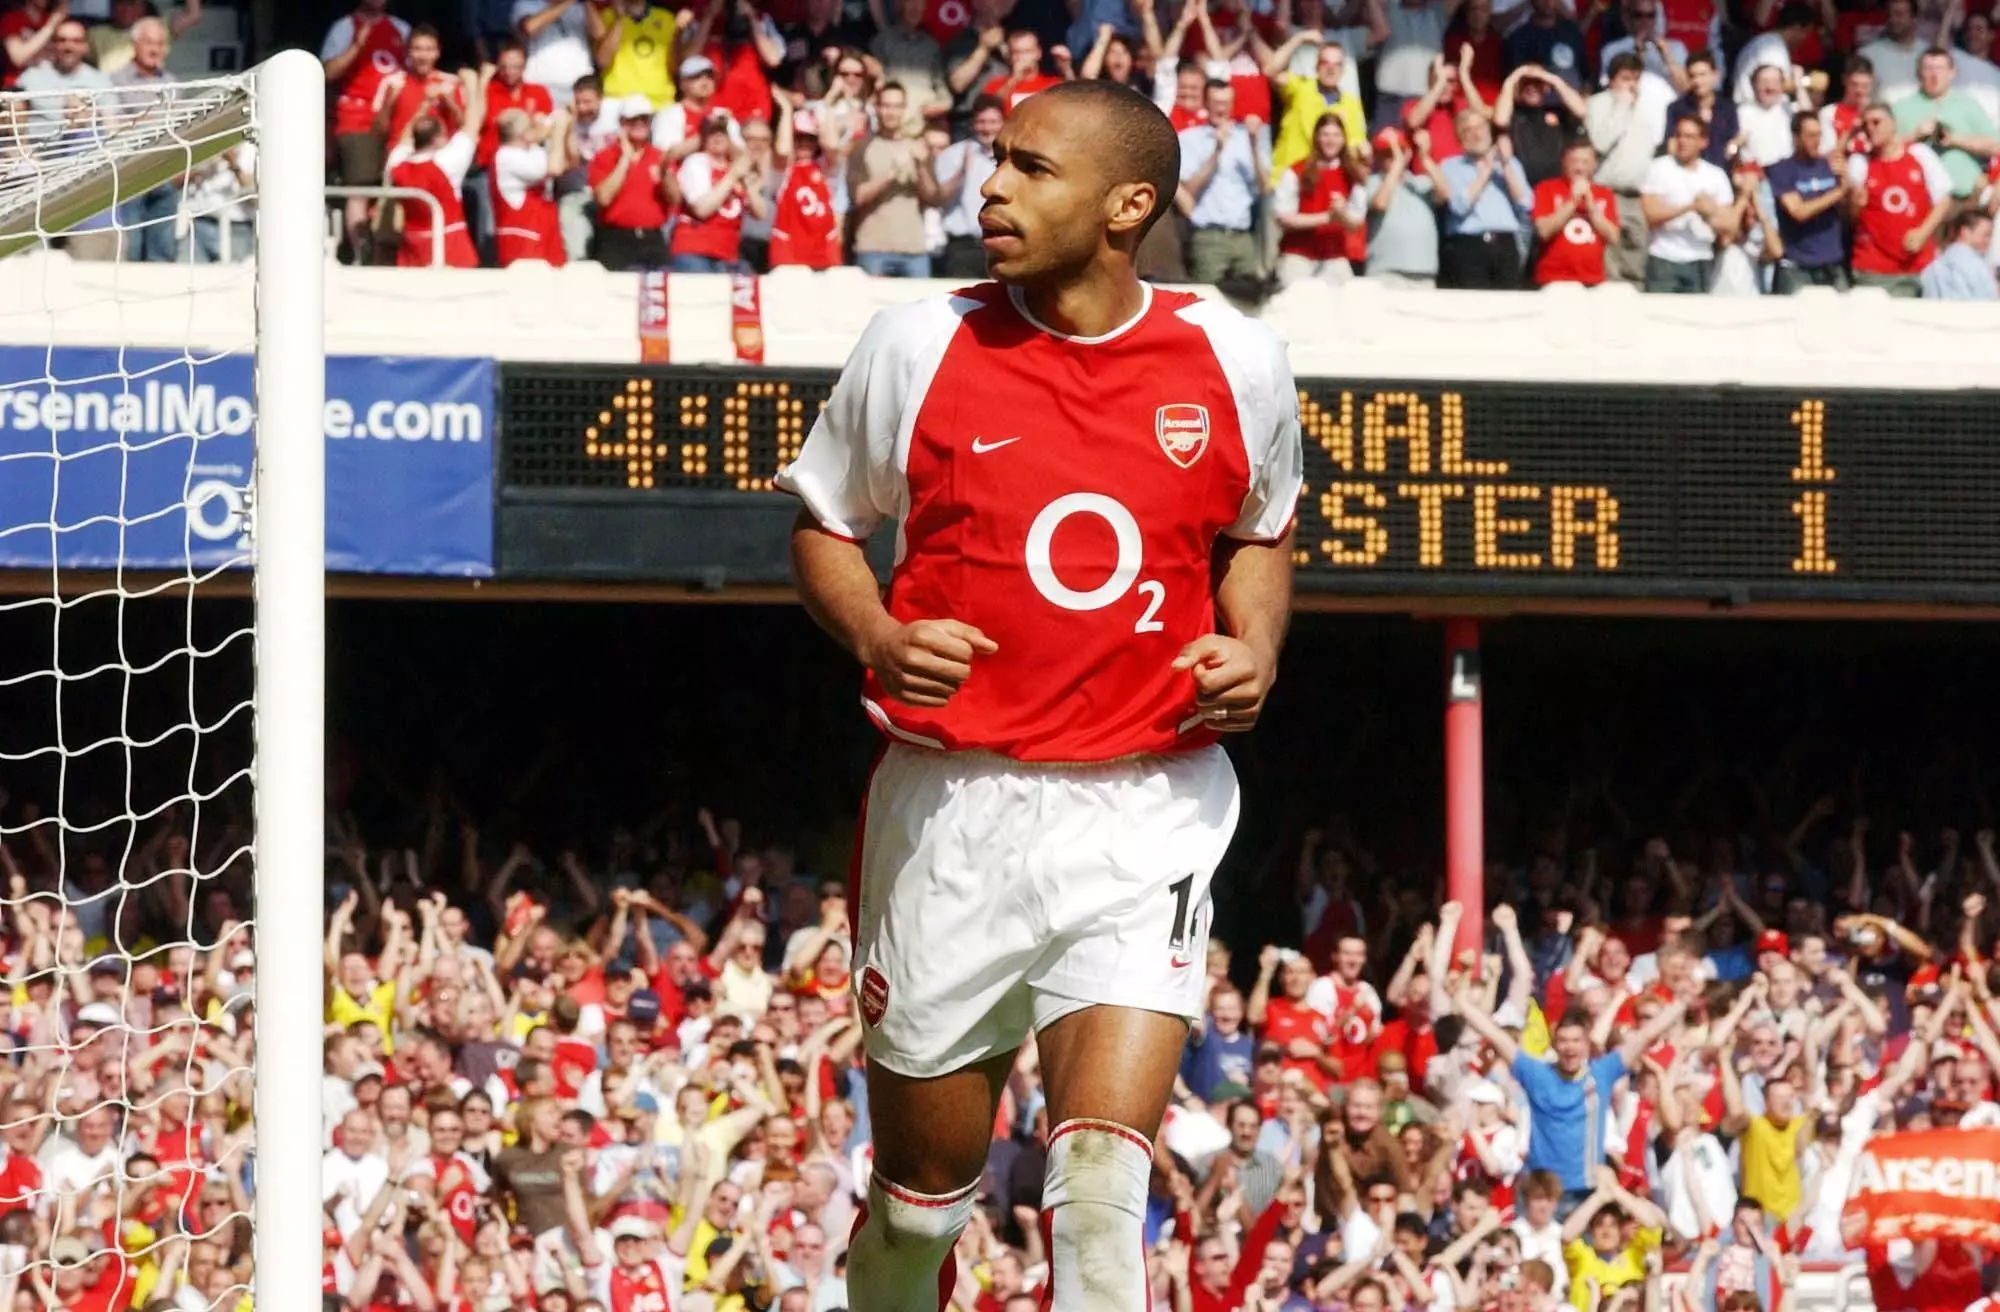 Arsenal Fan Claims Thierry Henry Is NOT The Premier League’s ‘Goat’